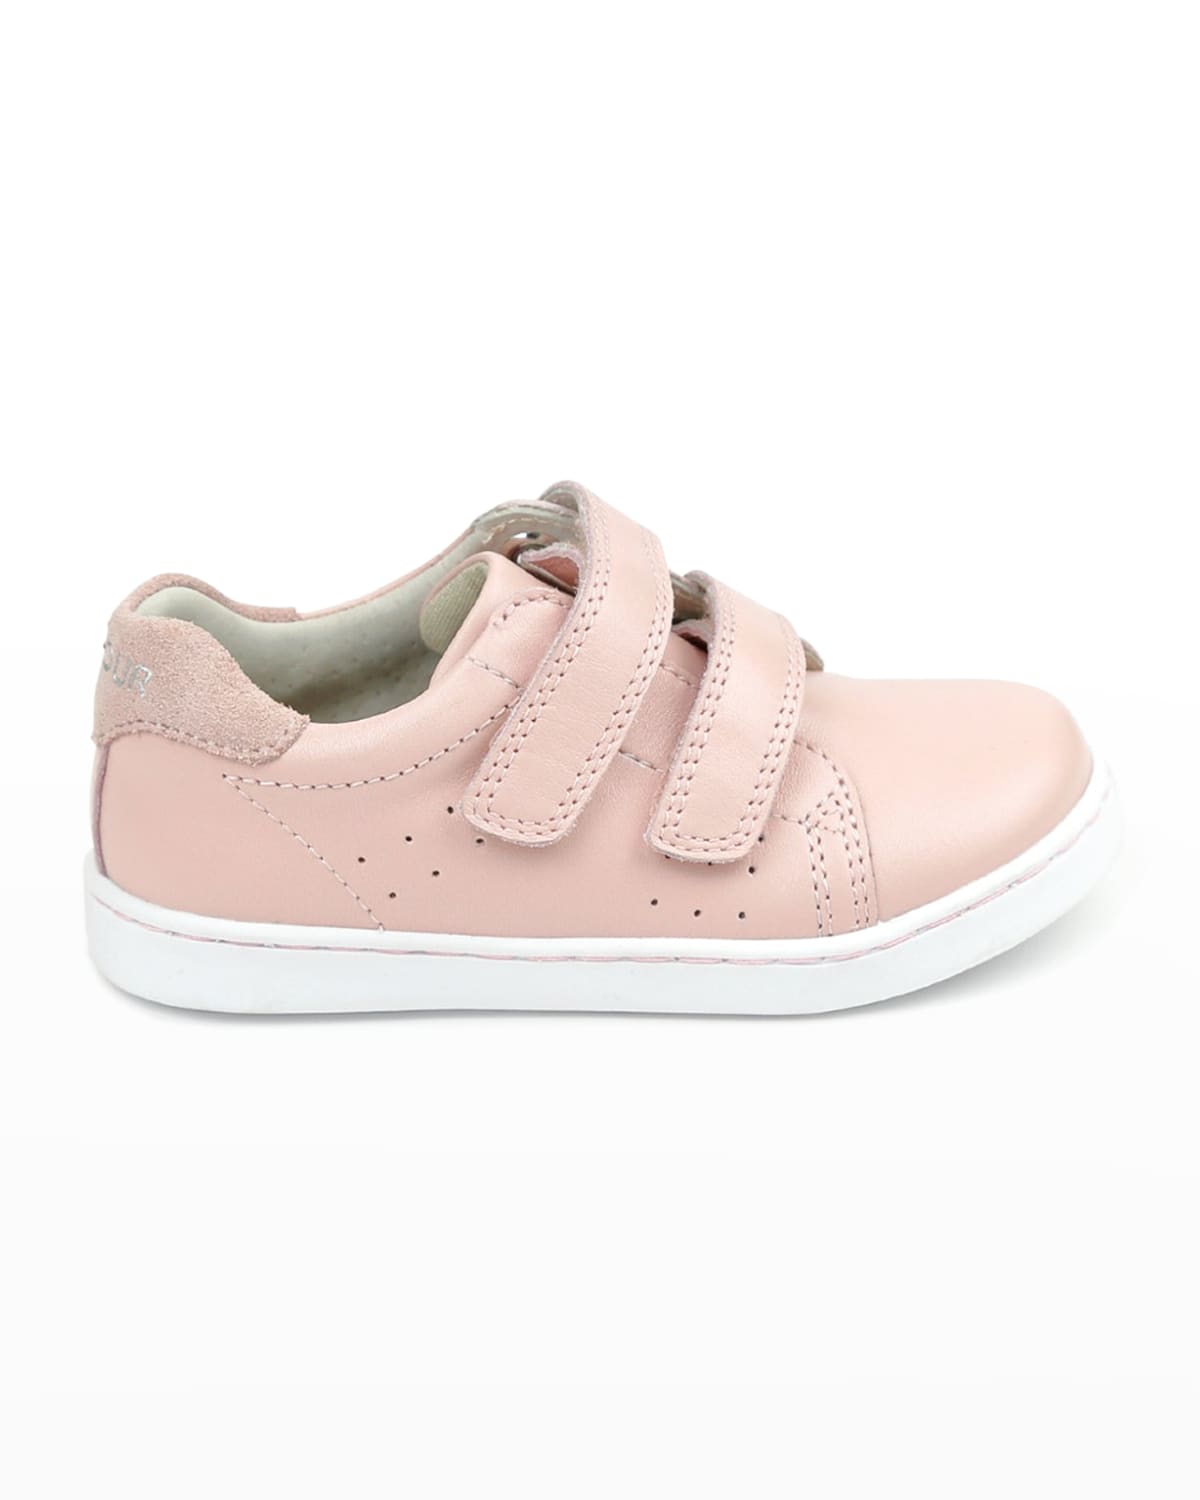 L'amour Shoes Girl's Kenzie Leather Trainers, Baby/toddlers/kids In Pink